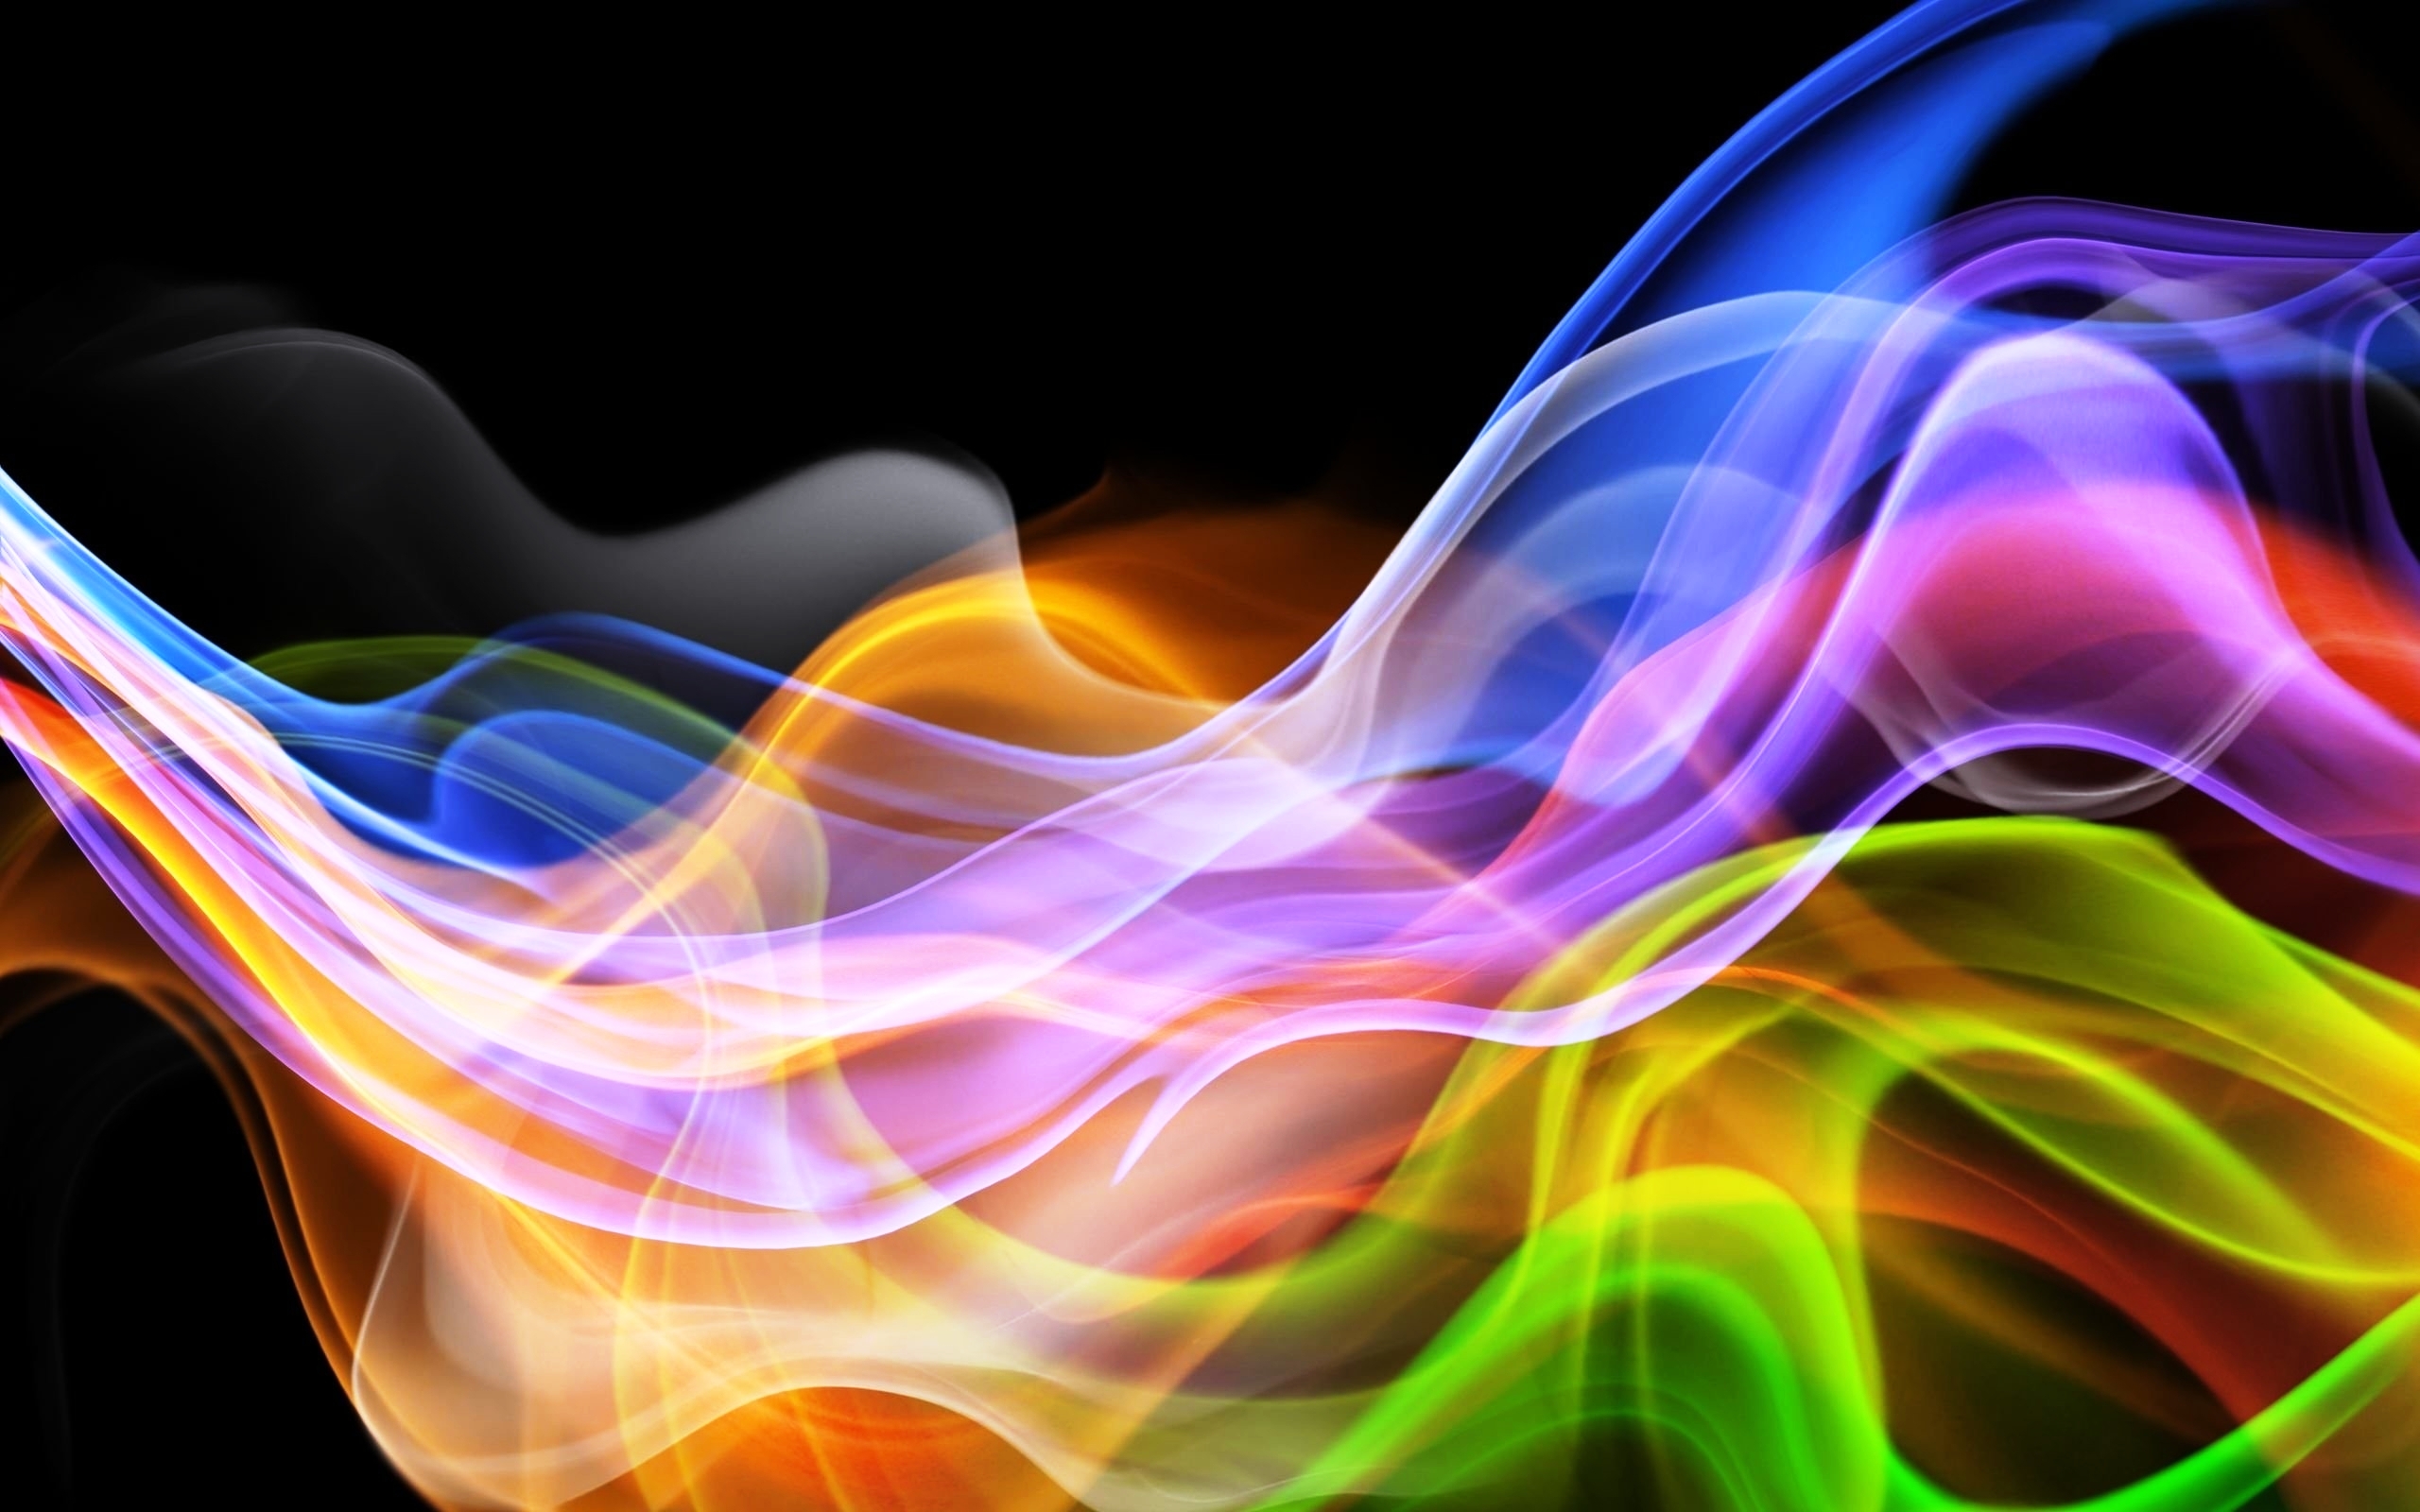 3d Abstract Colorful Smoke Wallpaper 2722 Wallpaper computer best 2560x1600